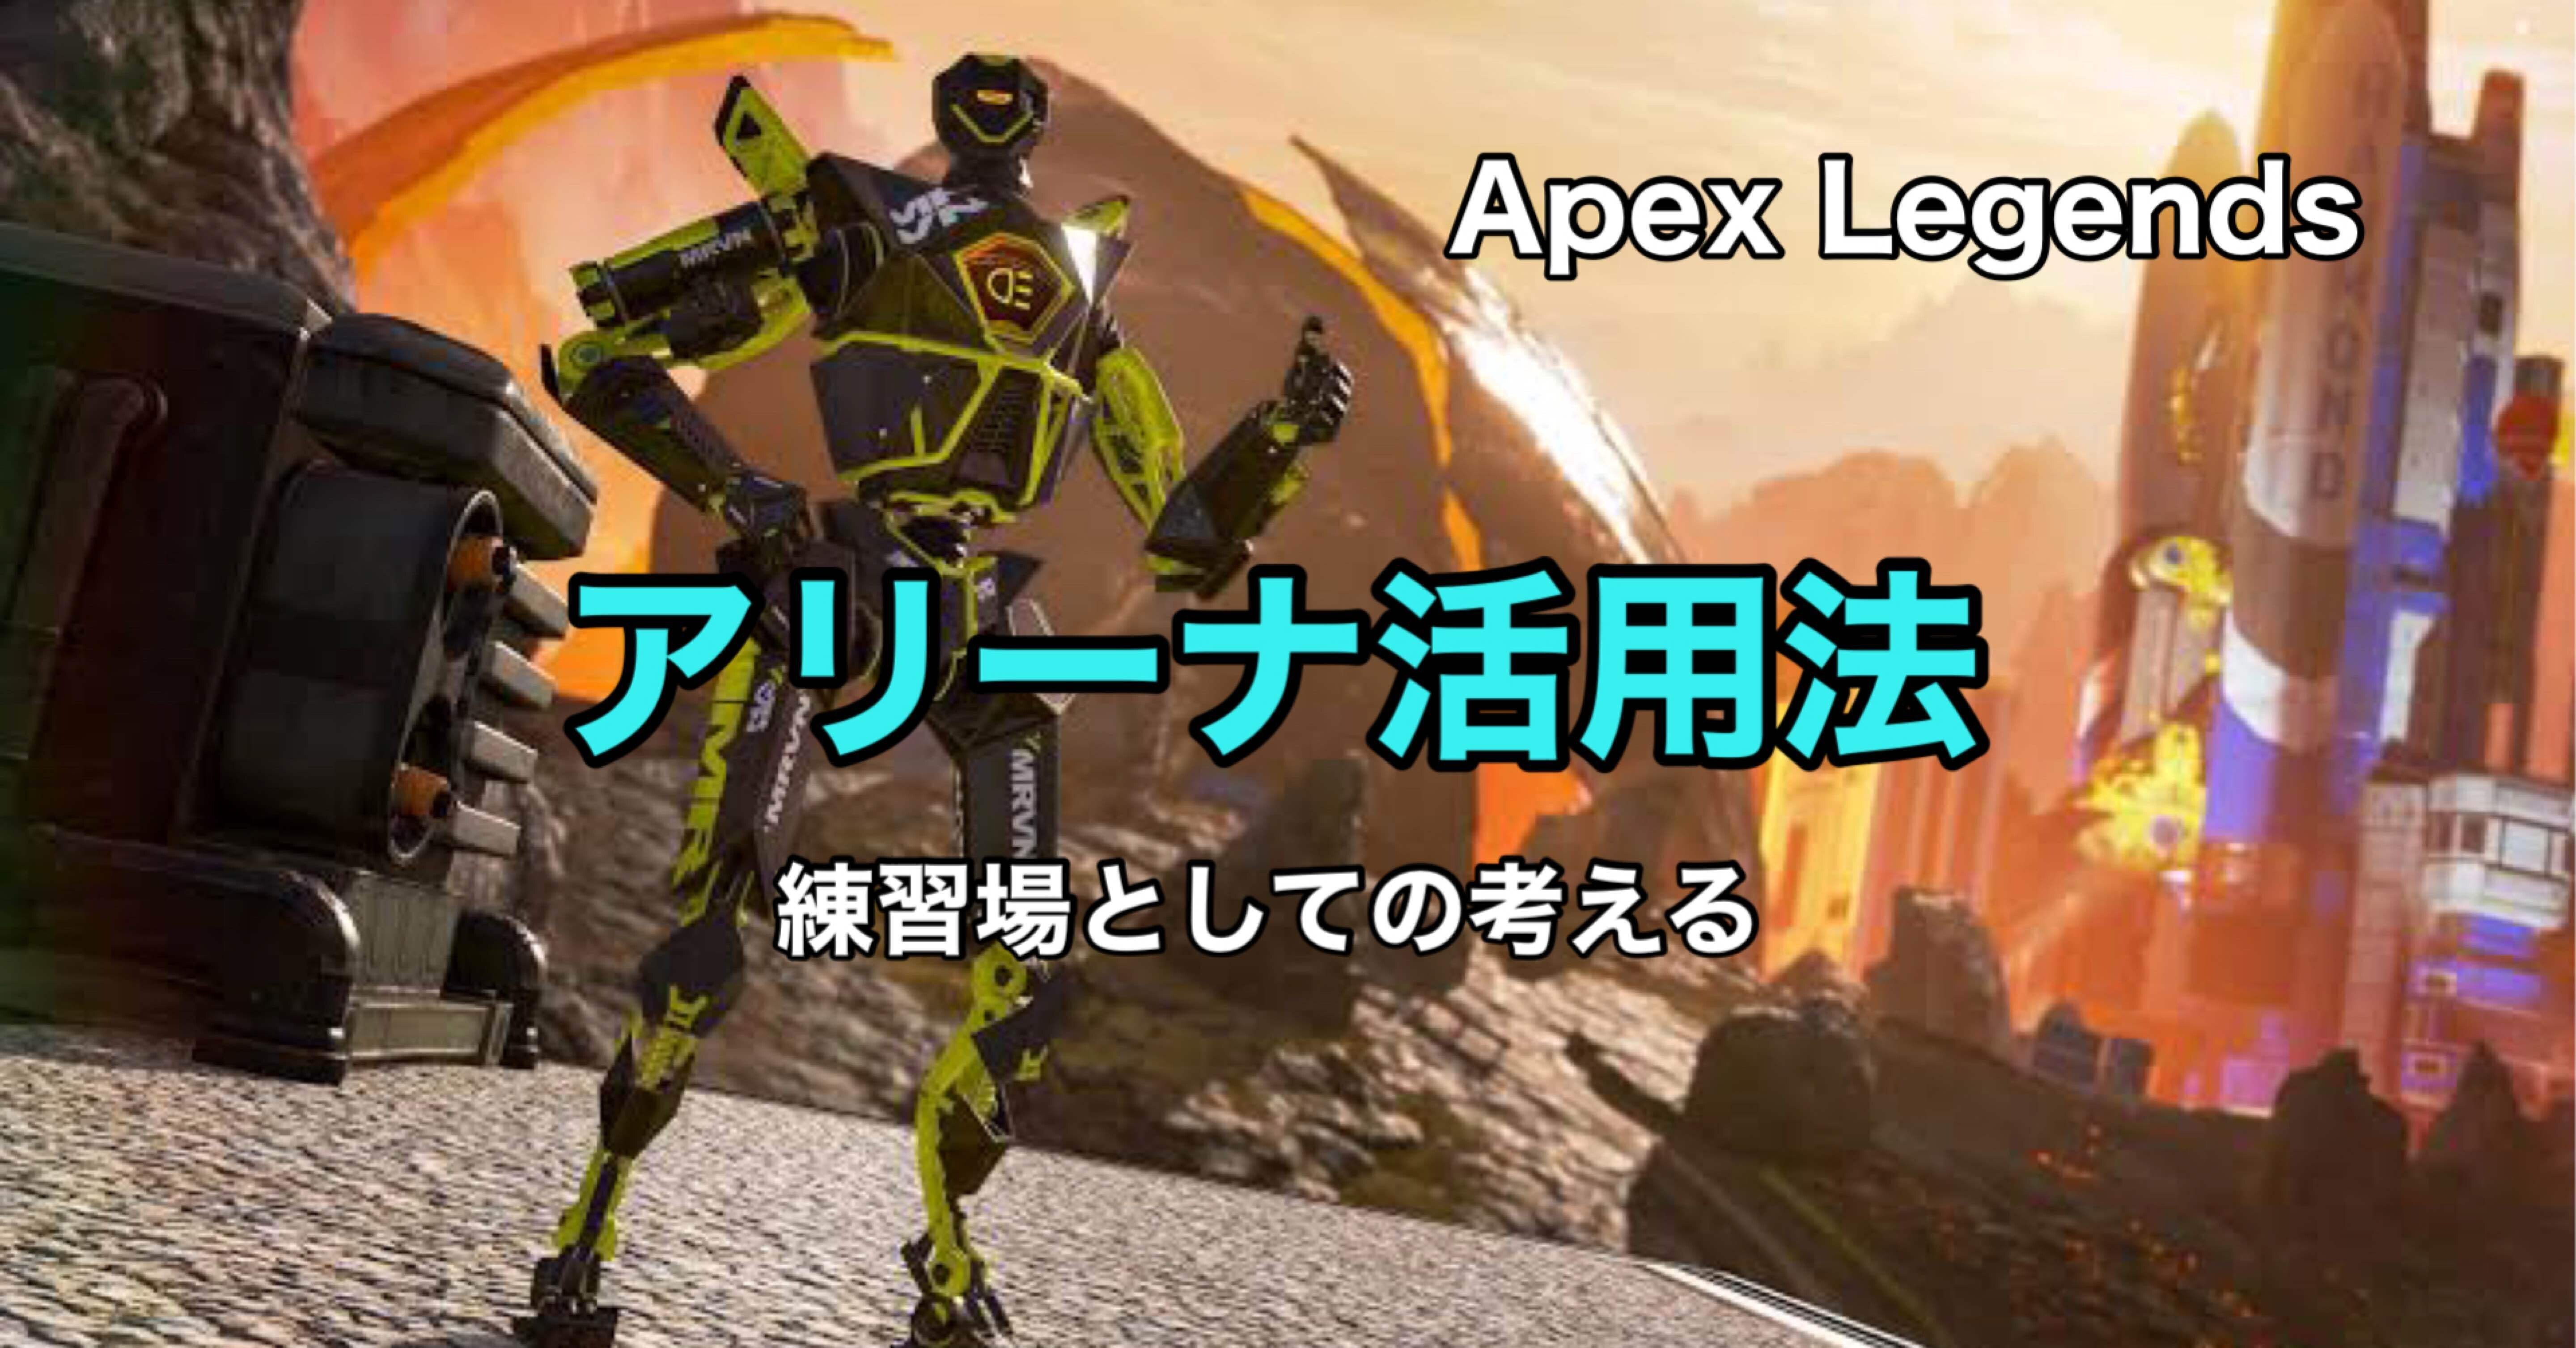 Apex Legends アリーナの活用 練習場として考えてみる Hys ひす 11 29 Note Creator S Cup Note